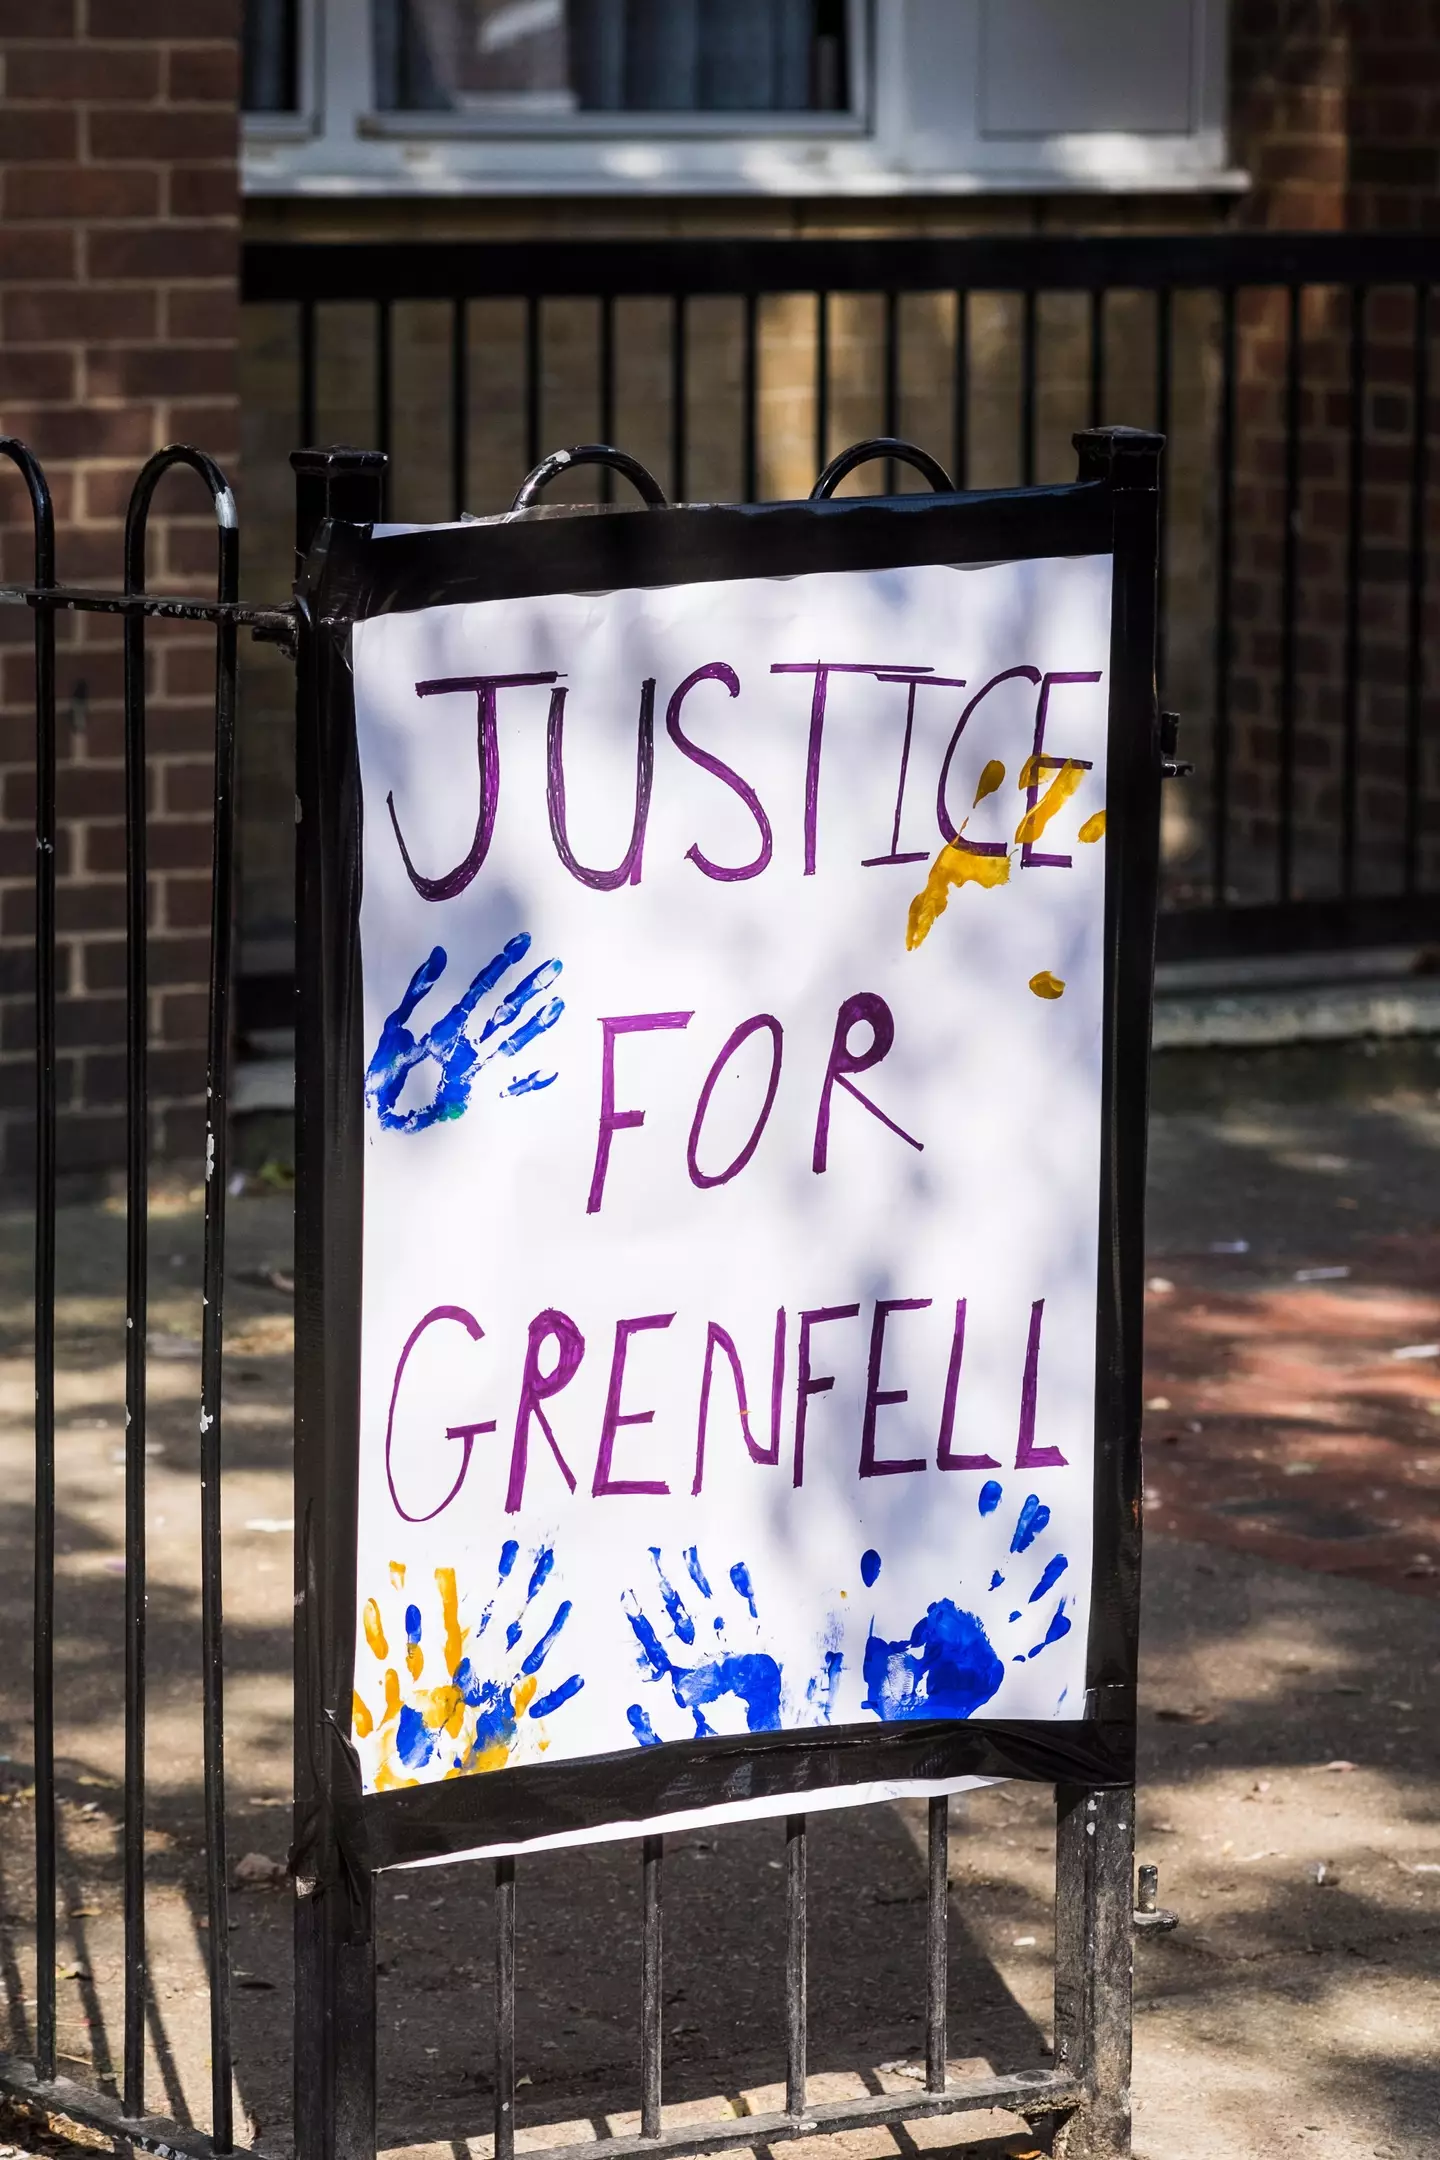 72 people died in the fire at Grenfell Tower.